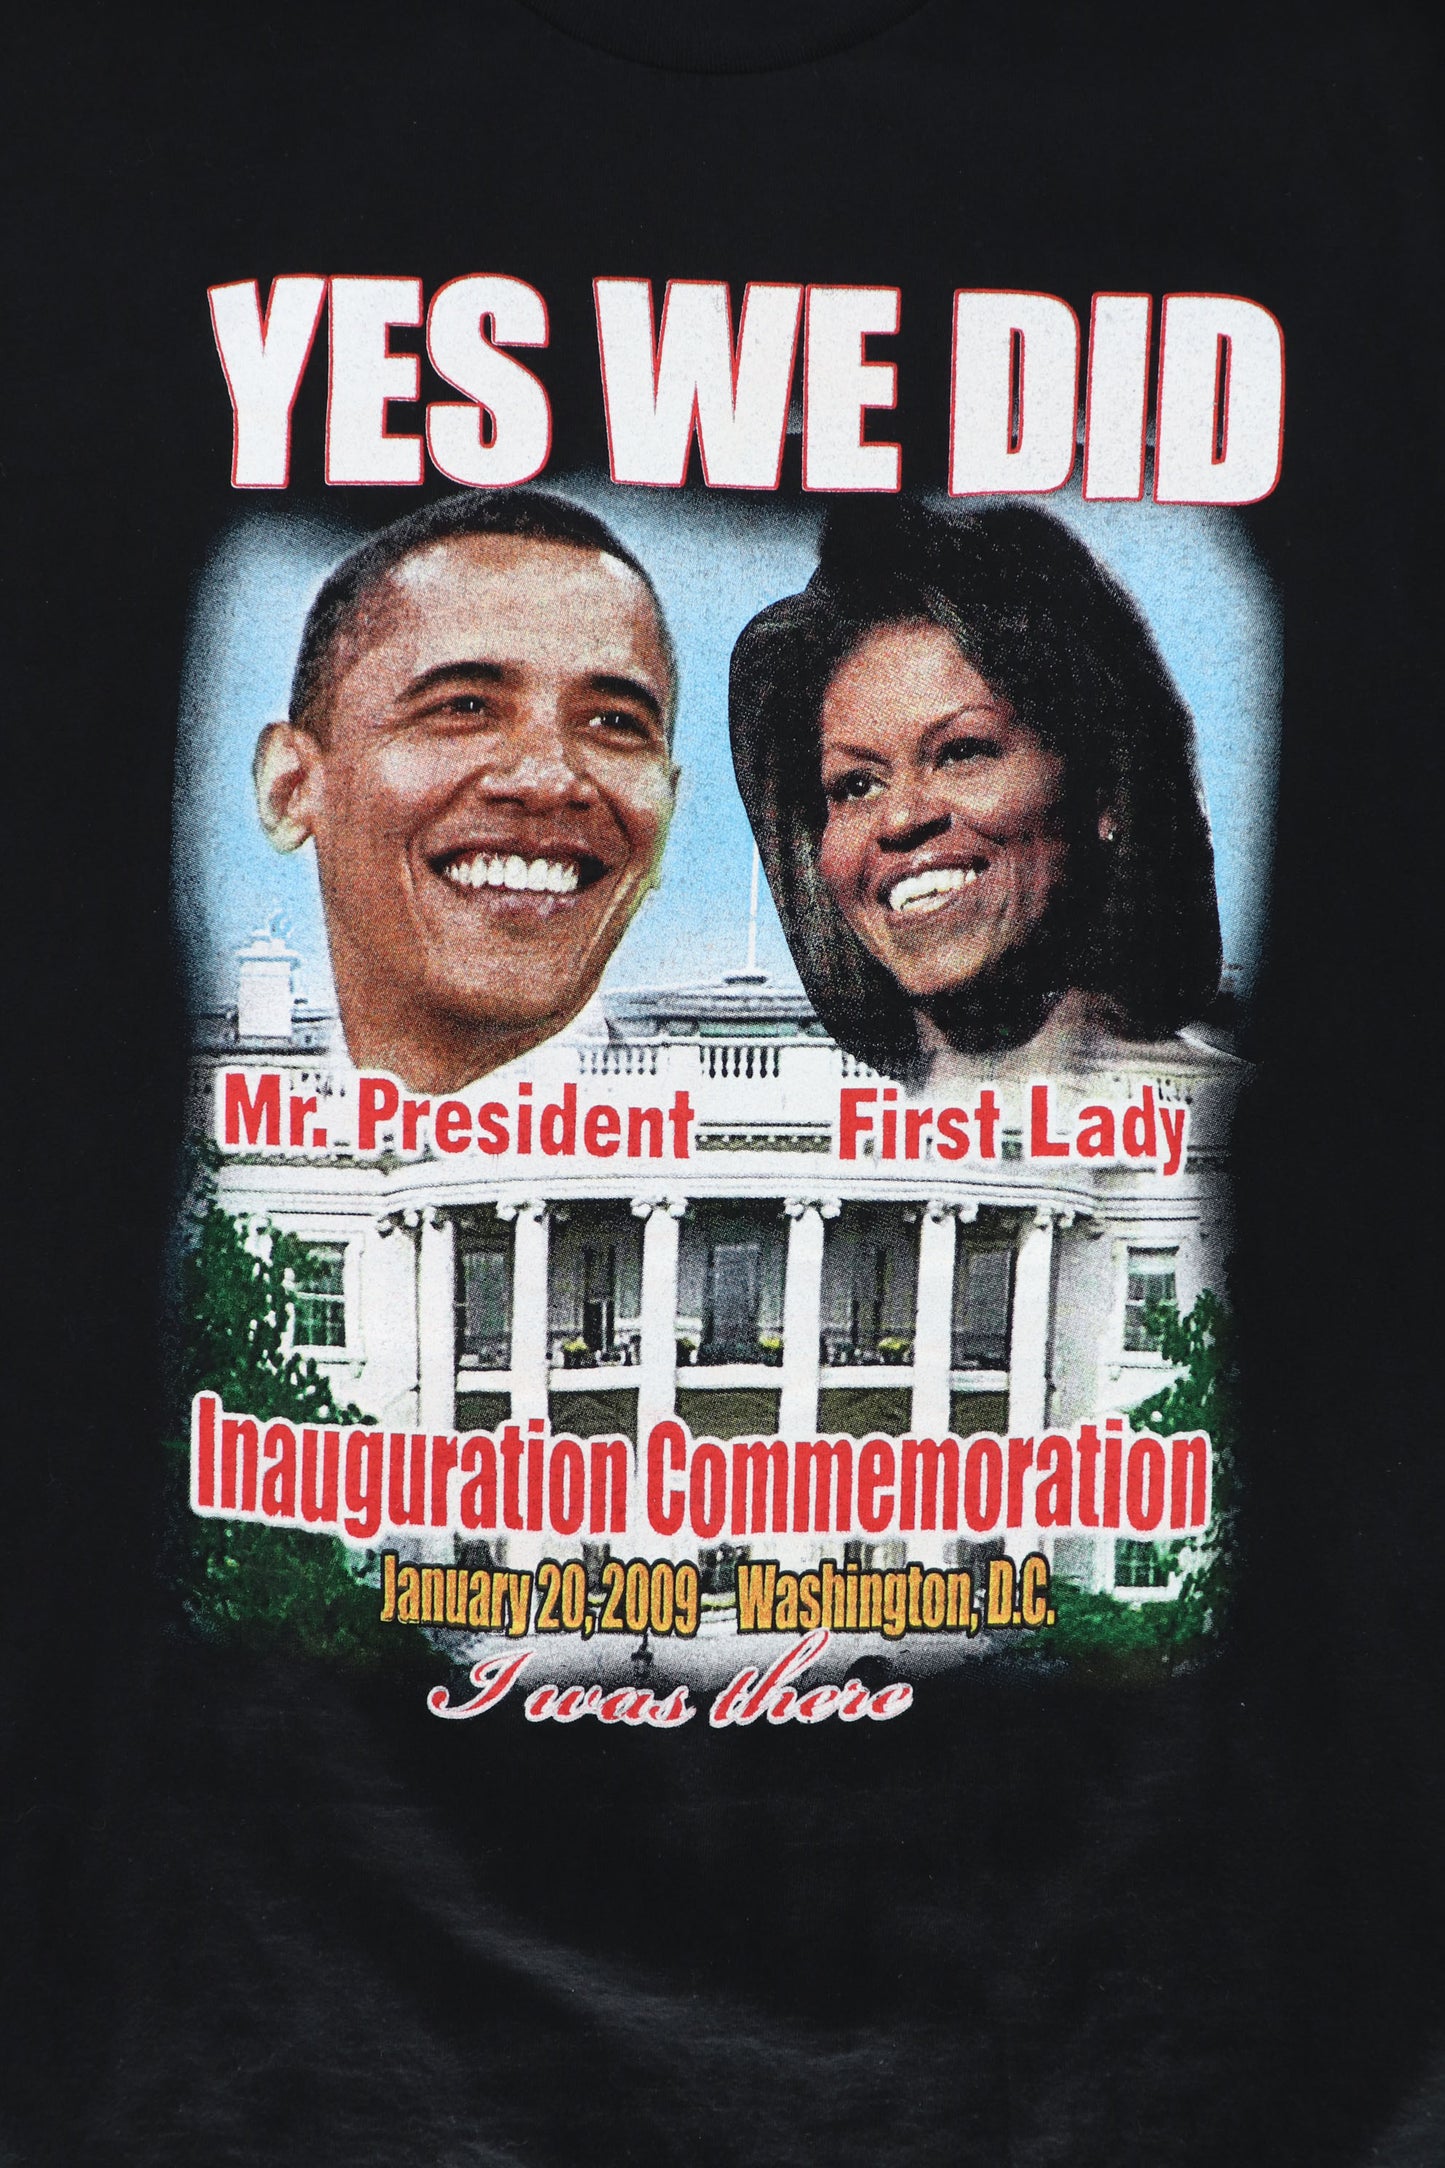 YES WE DID PRESIDENT OBAMA 2009